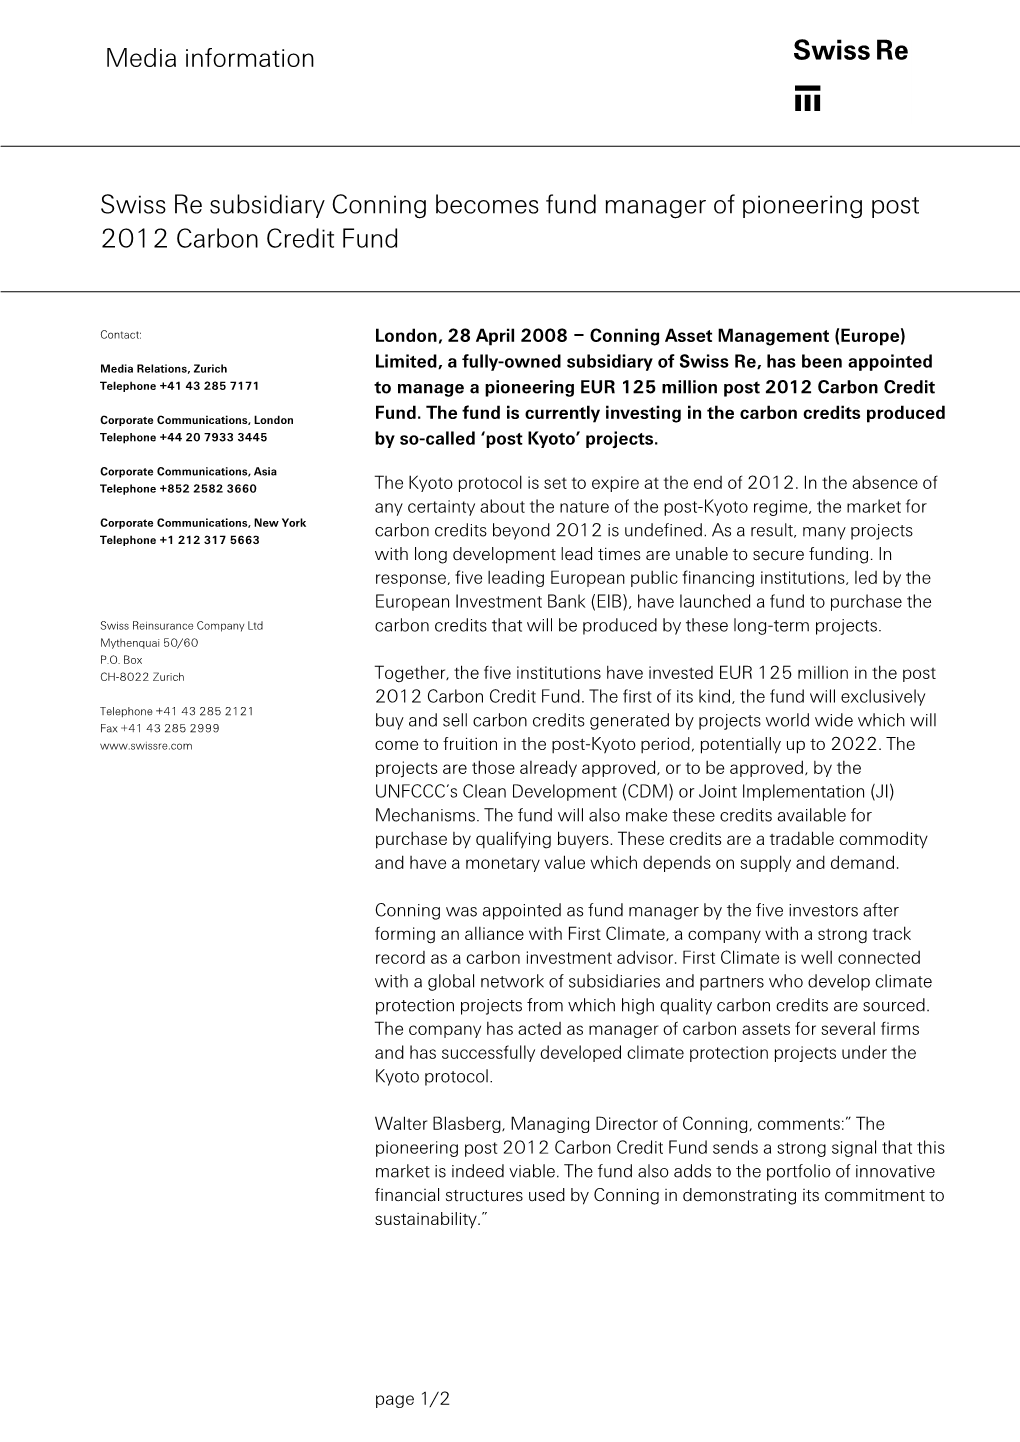 Swiss Re Subsidiary Conning Becomes Fund Manager of Pioneering Post 2012 Carbon Credit Fund